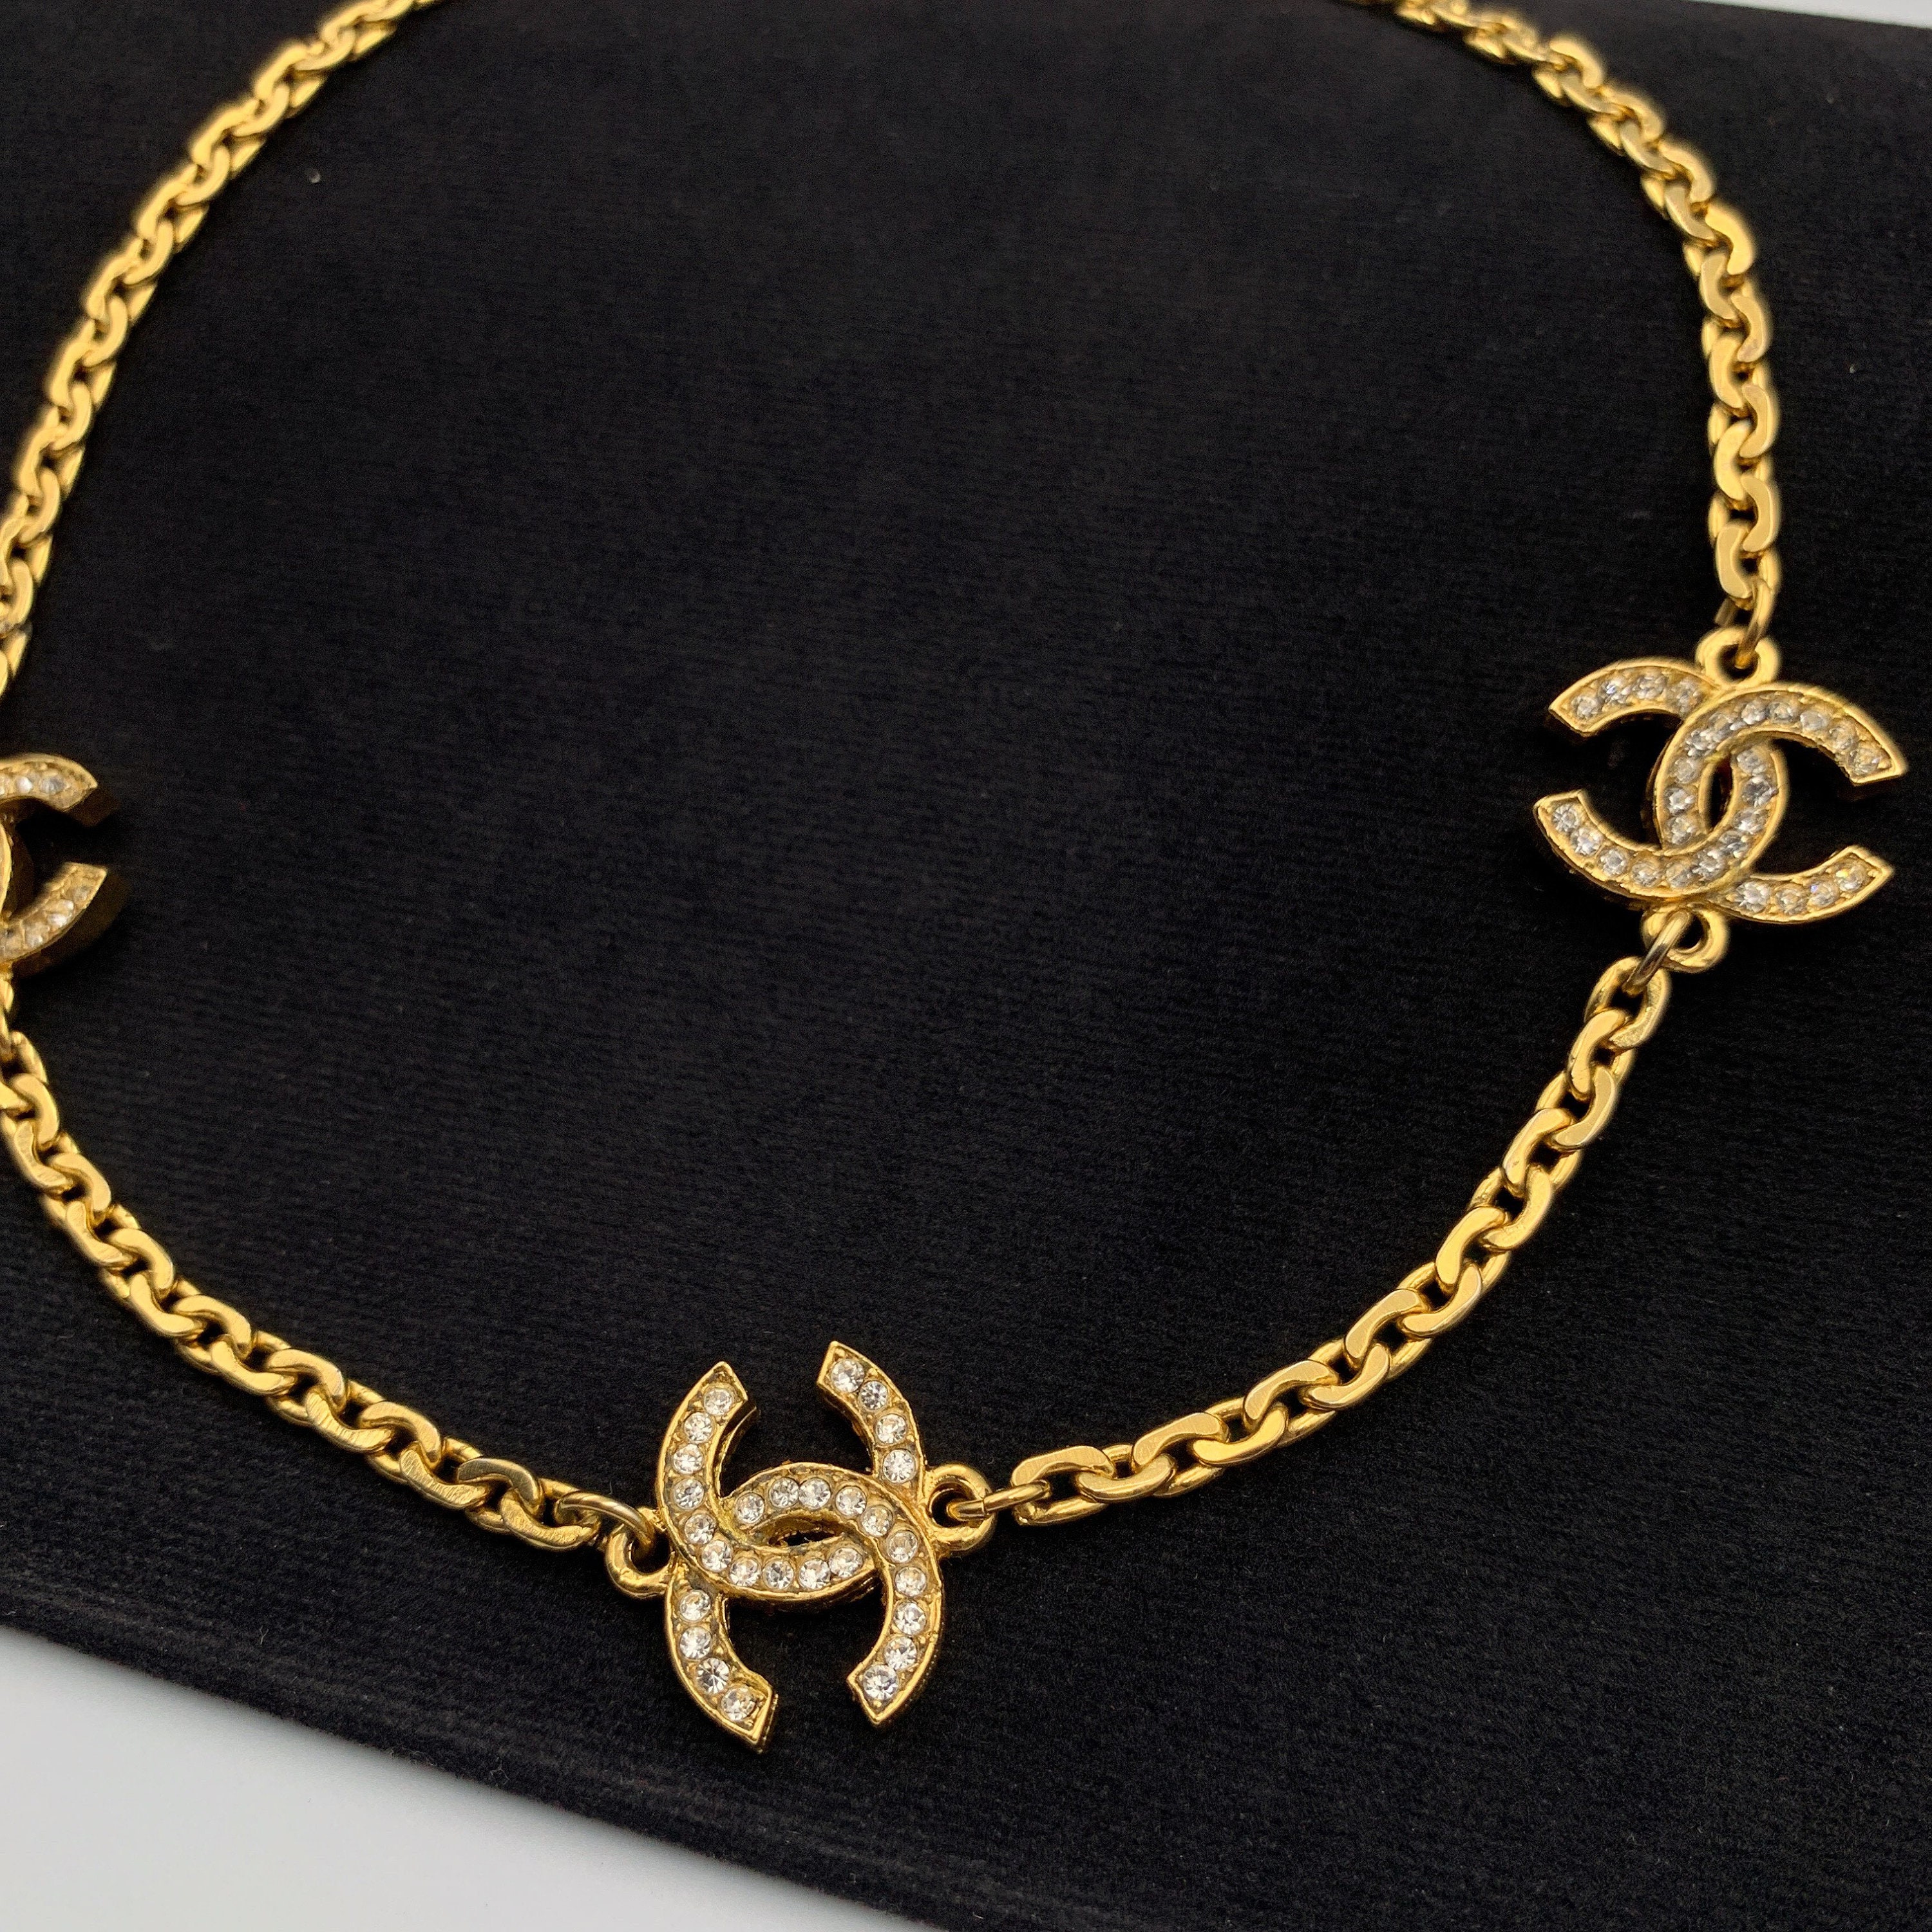 Vintage 80s CHANEL Crystal CC Choker Necklace -  Israel